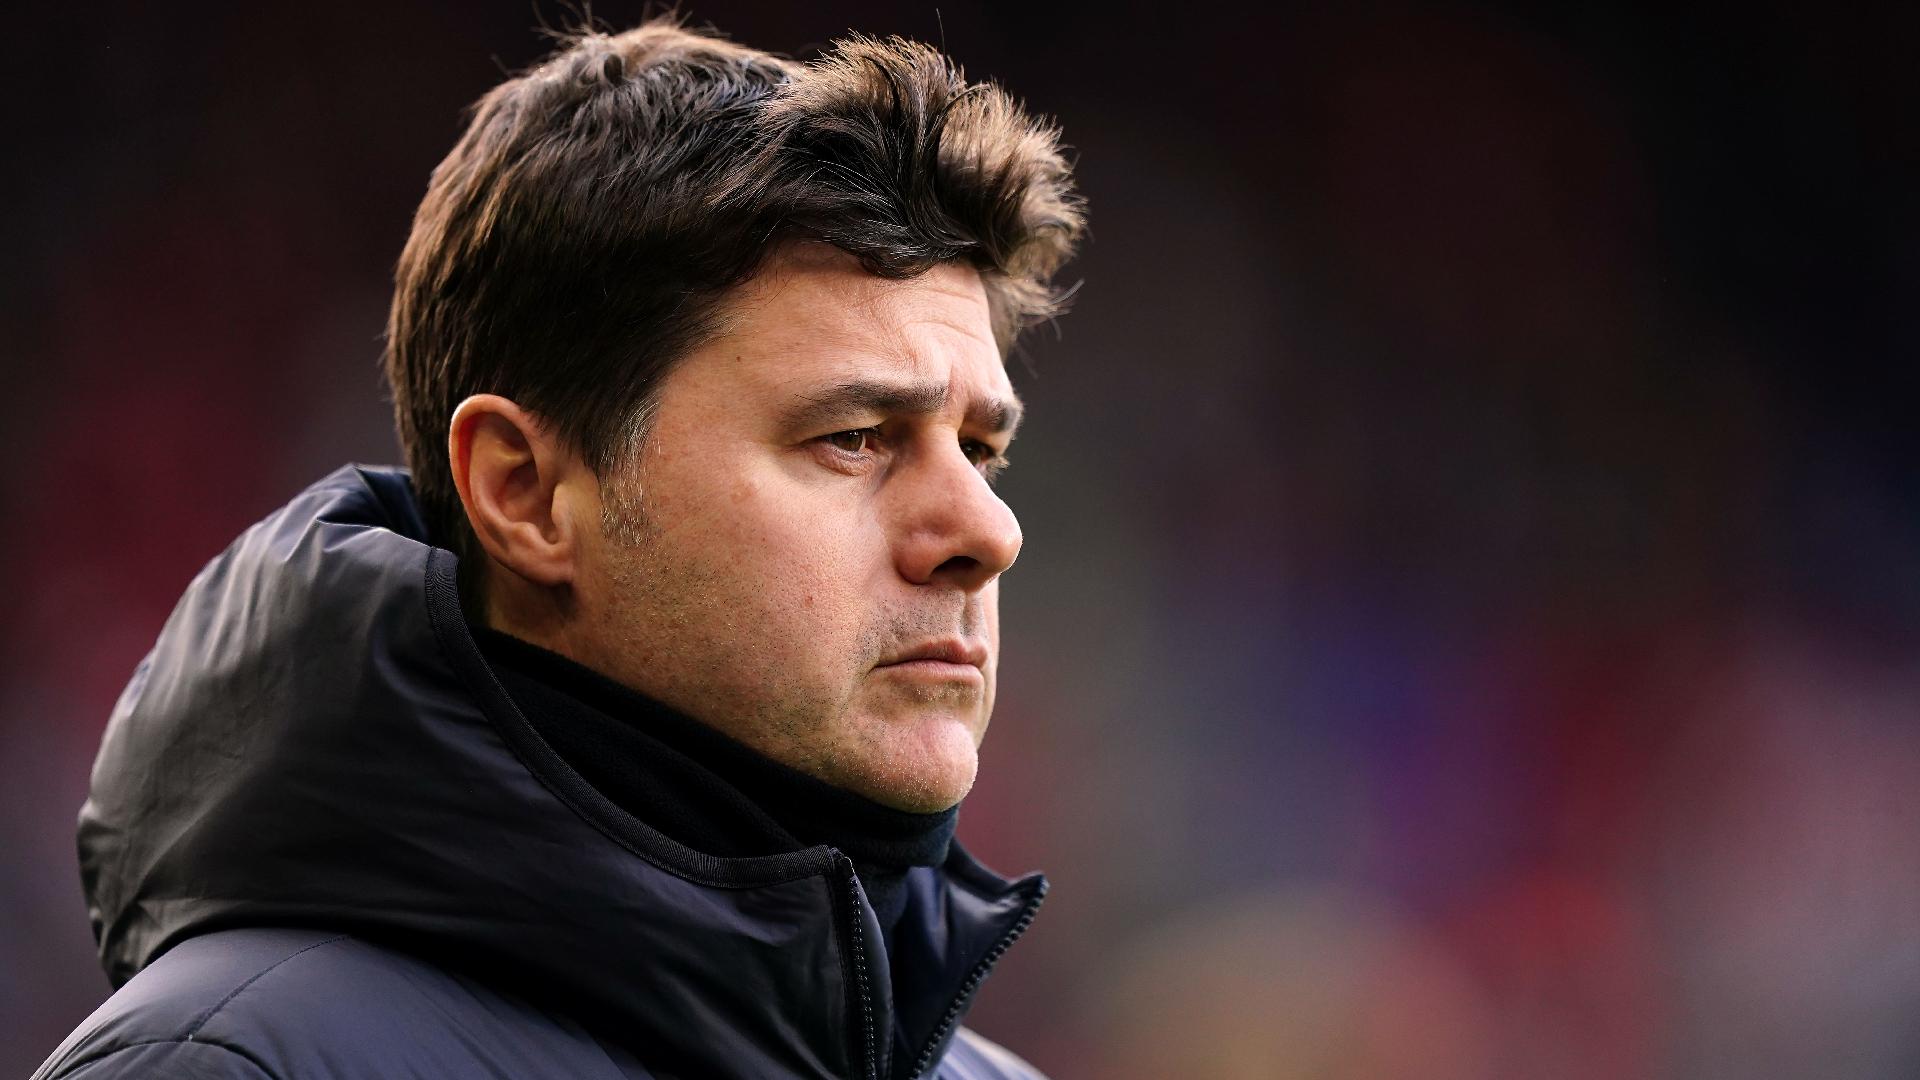 We know what we’re doing – Mauricio Pochettino backs ‘suffering’ Chelsea owners